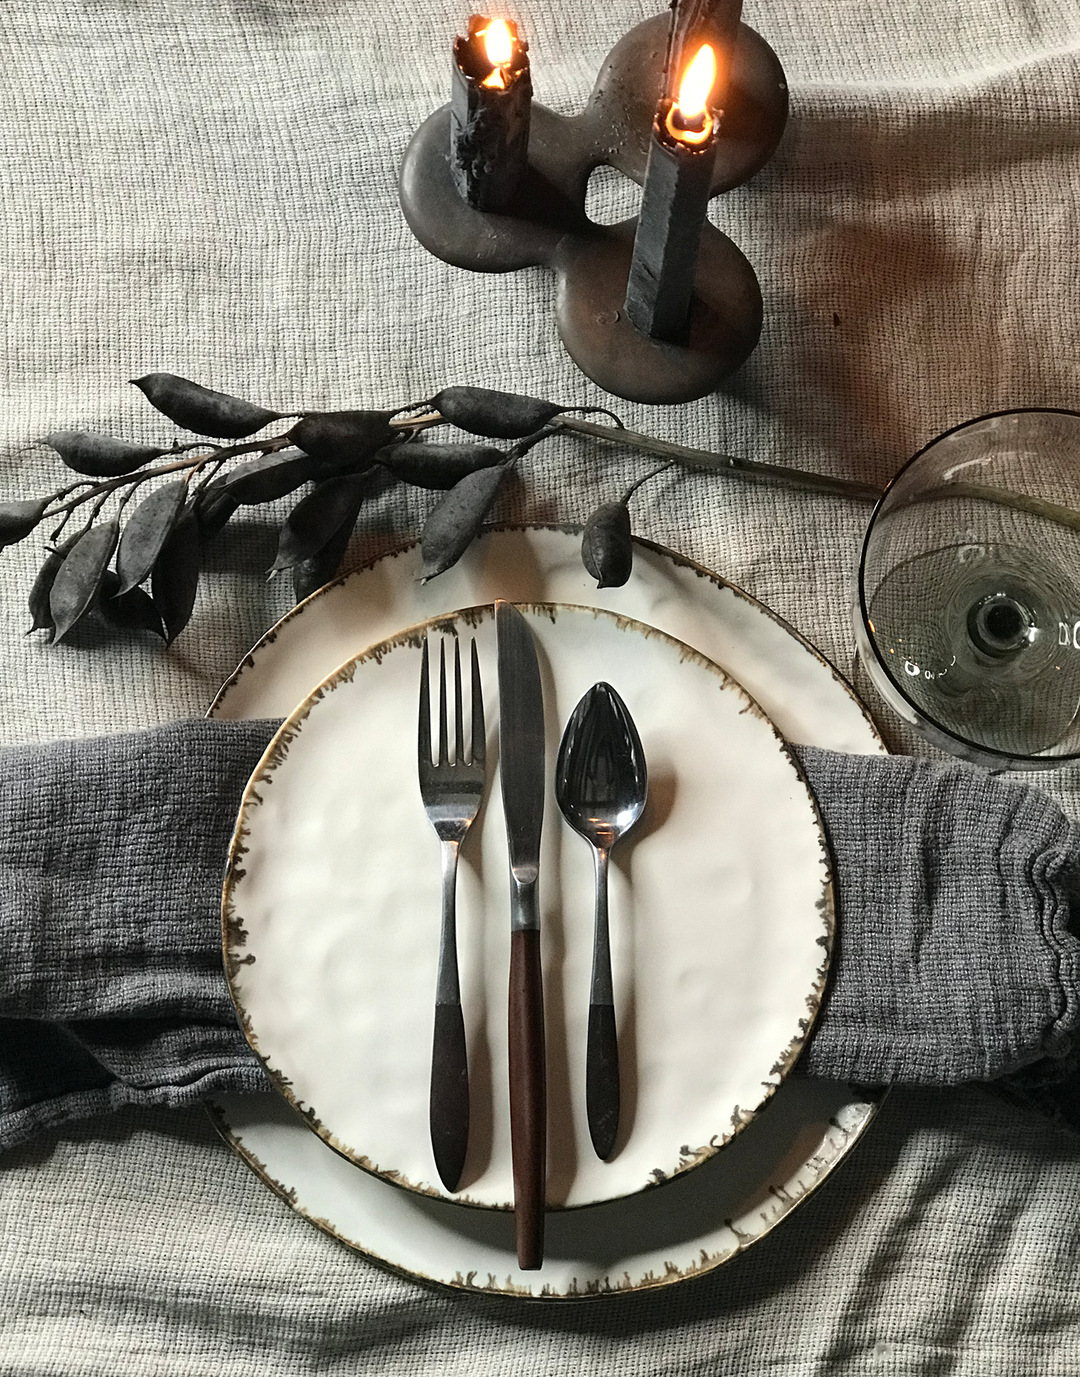 Pinch handmade ceramic dinner plate set from dbo home with natural textured edges, on linen cloth with vintage glassware and bronze candlesticks